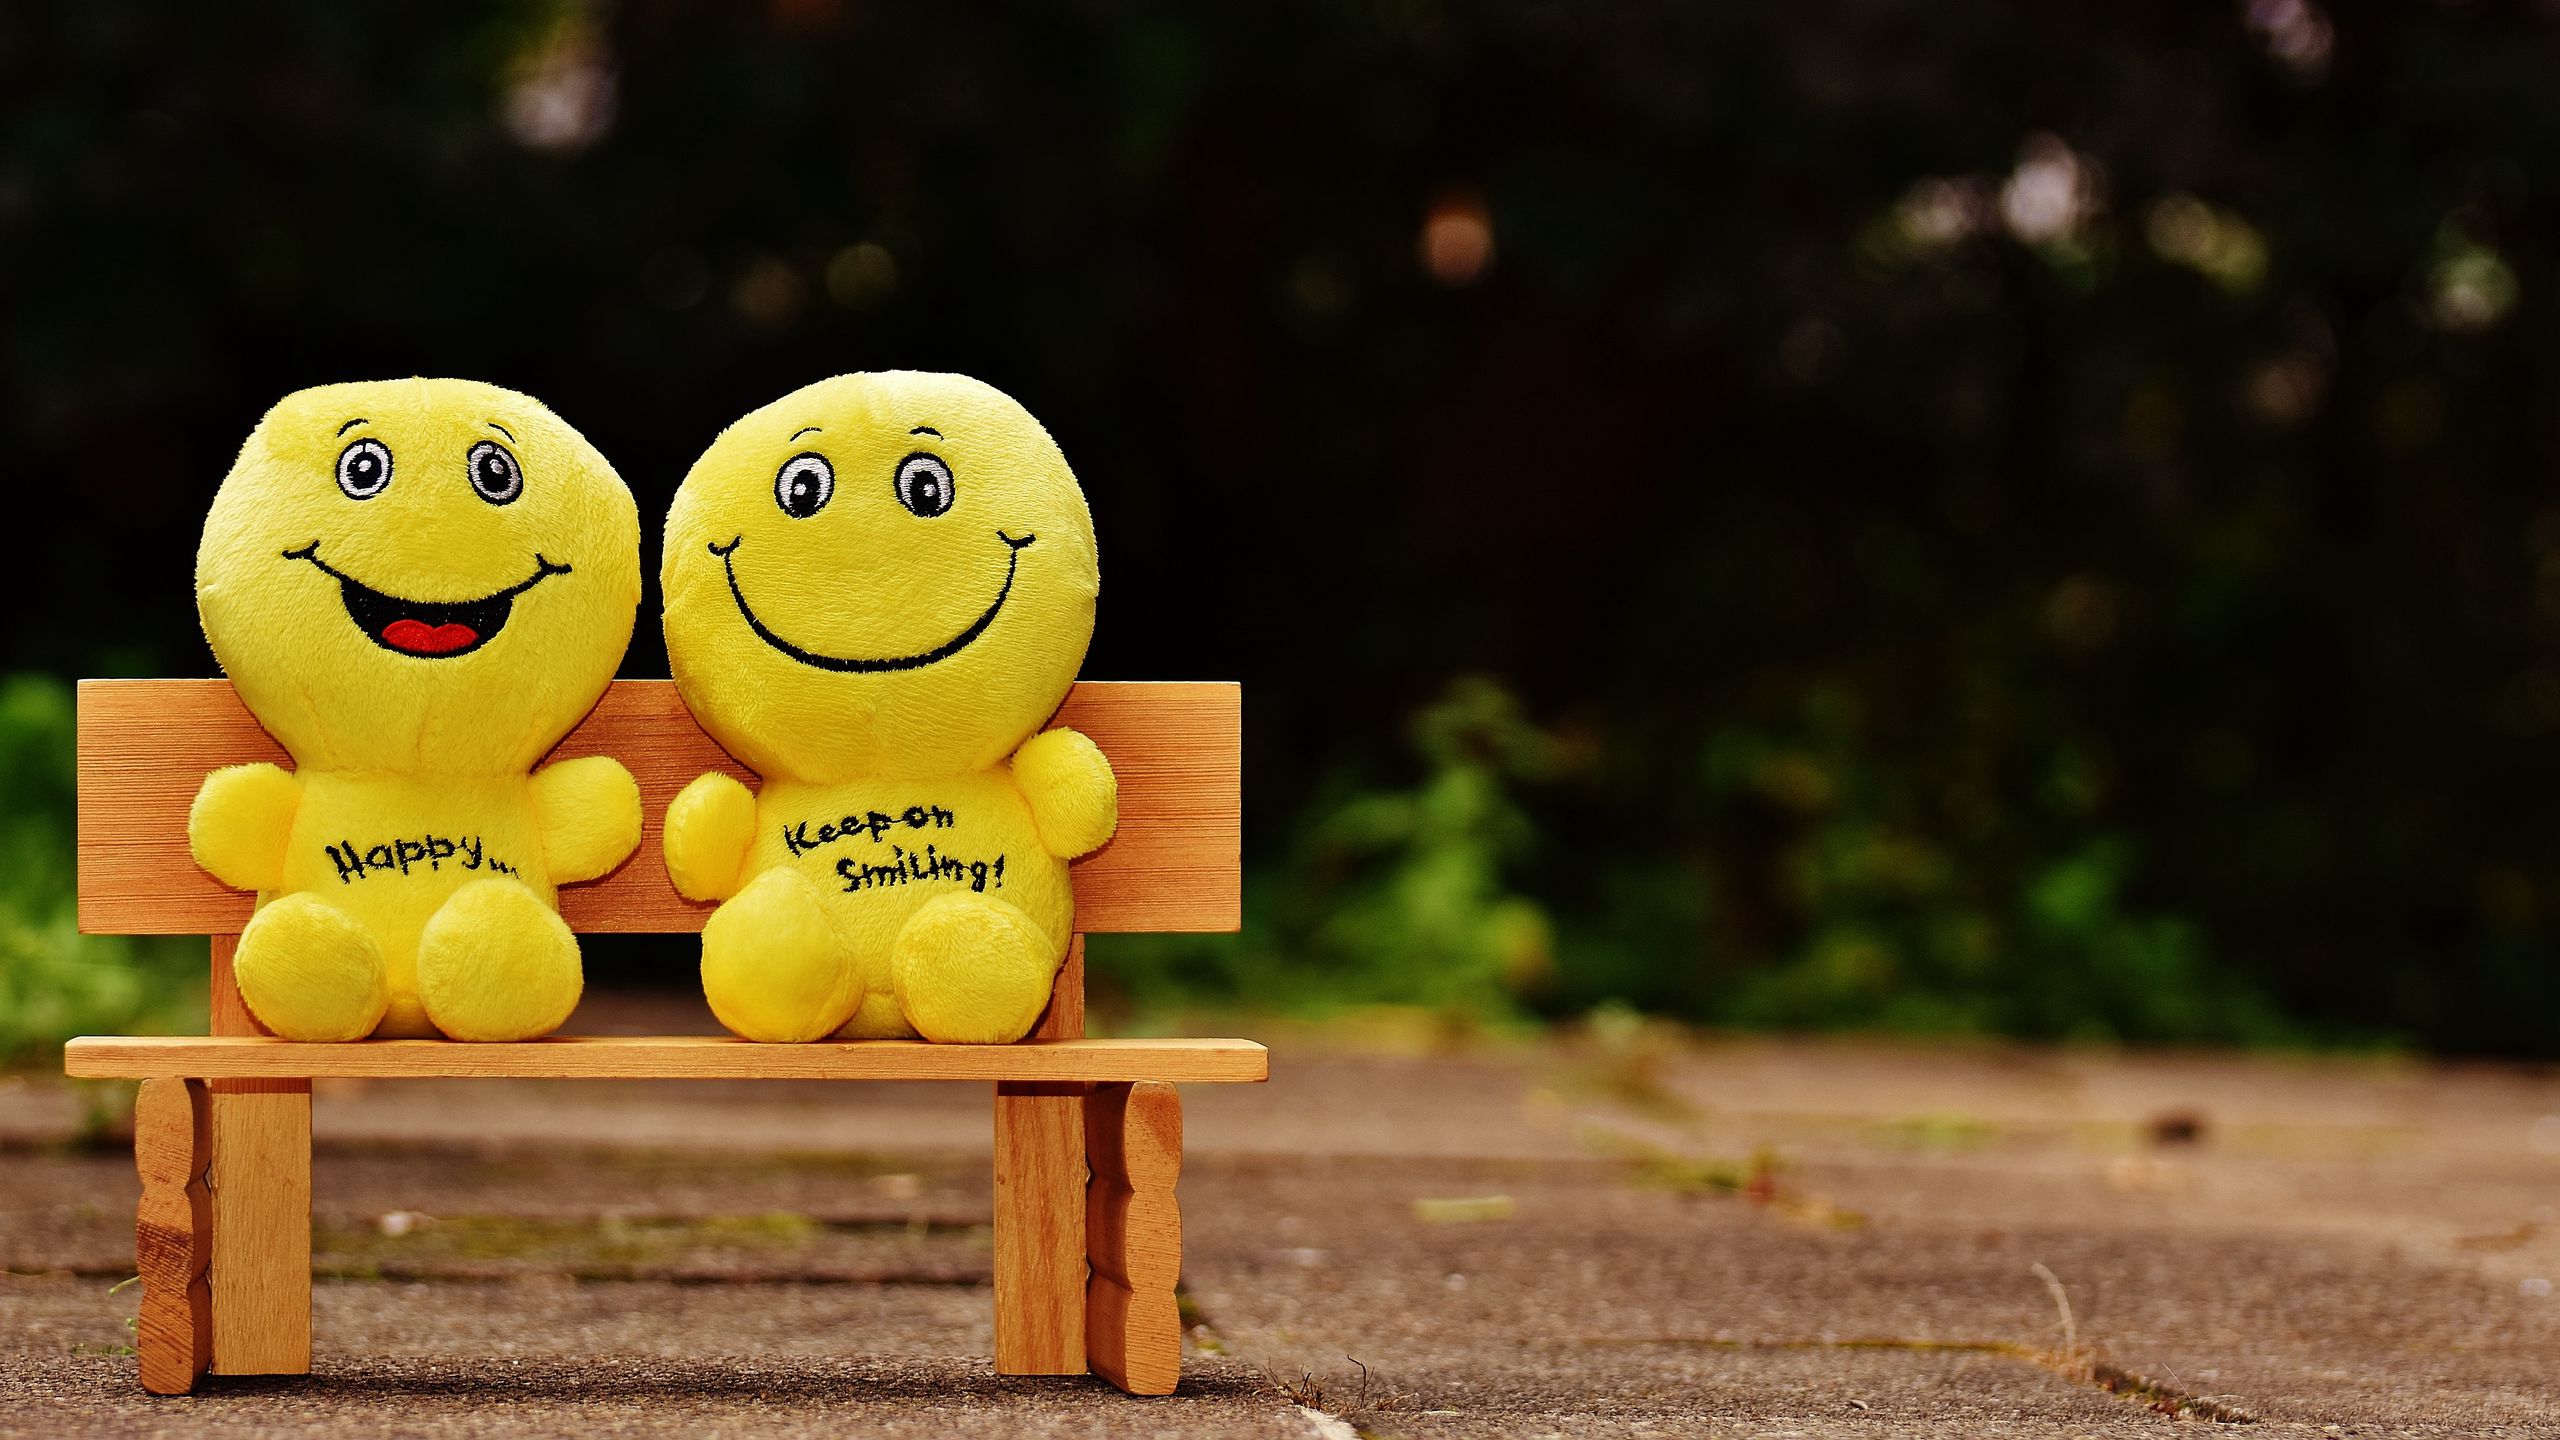 2560x1440 Wallpaper smiles, happy, cheerful, smile, bench, cute